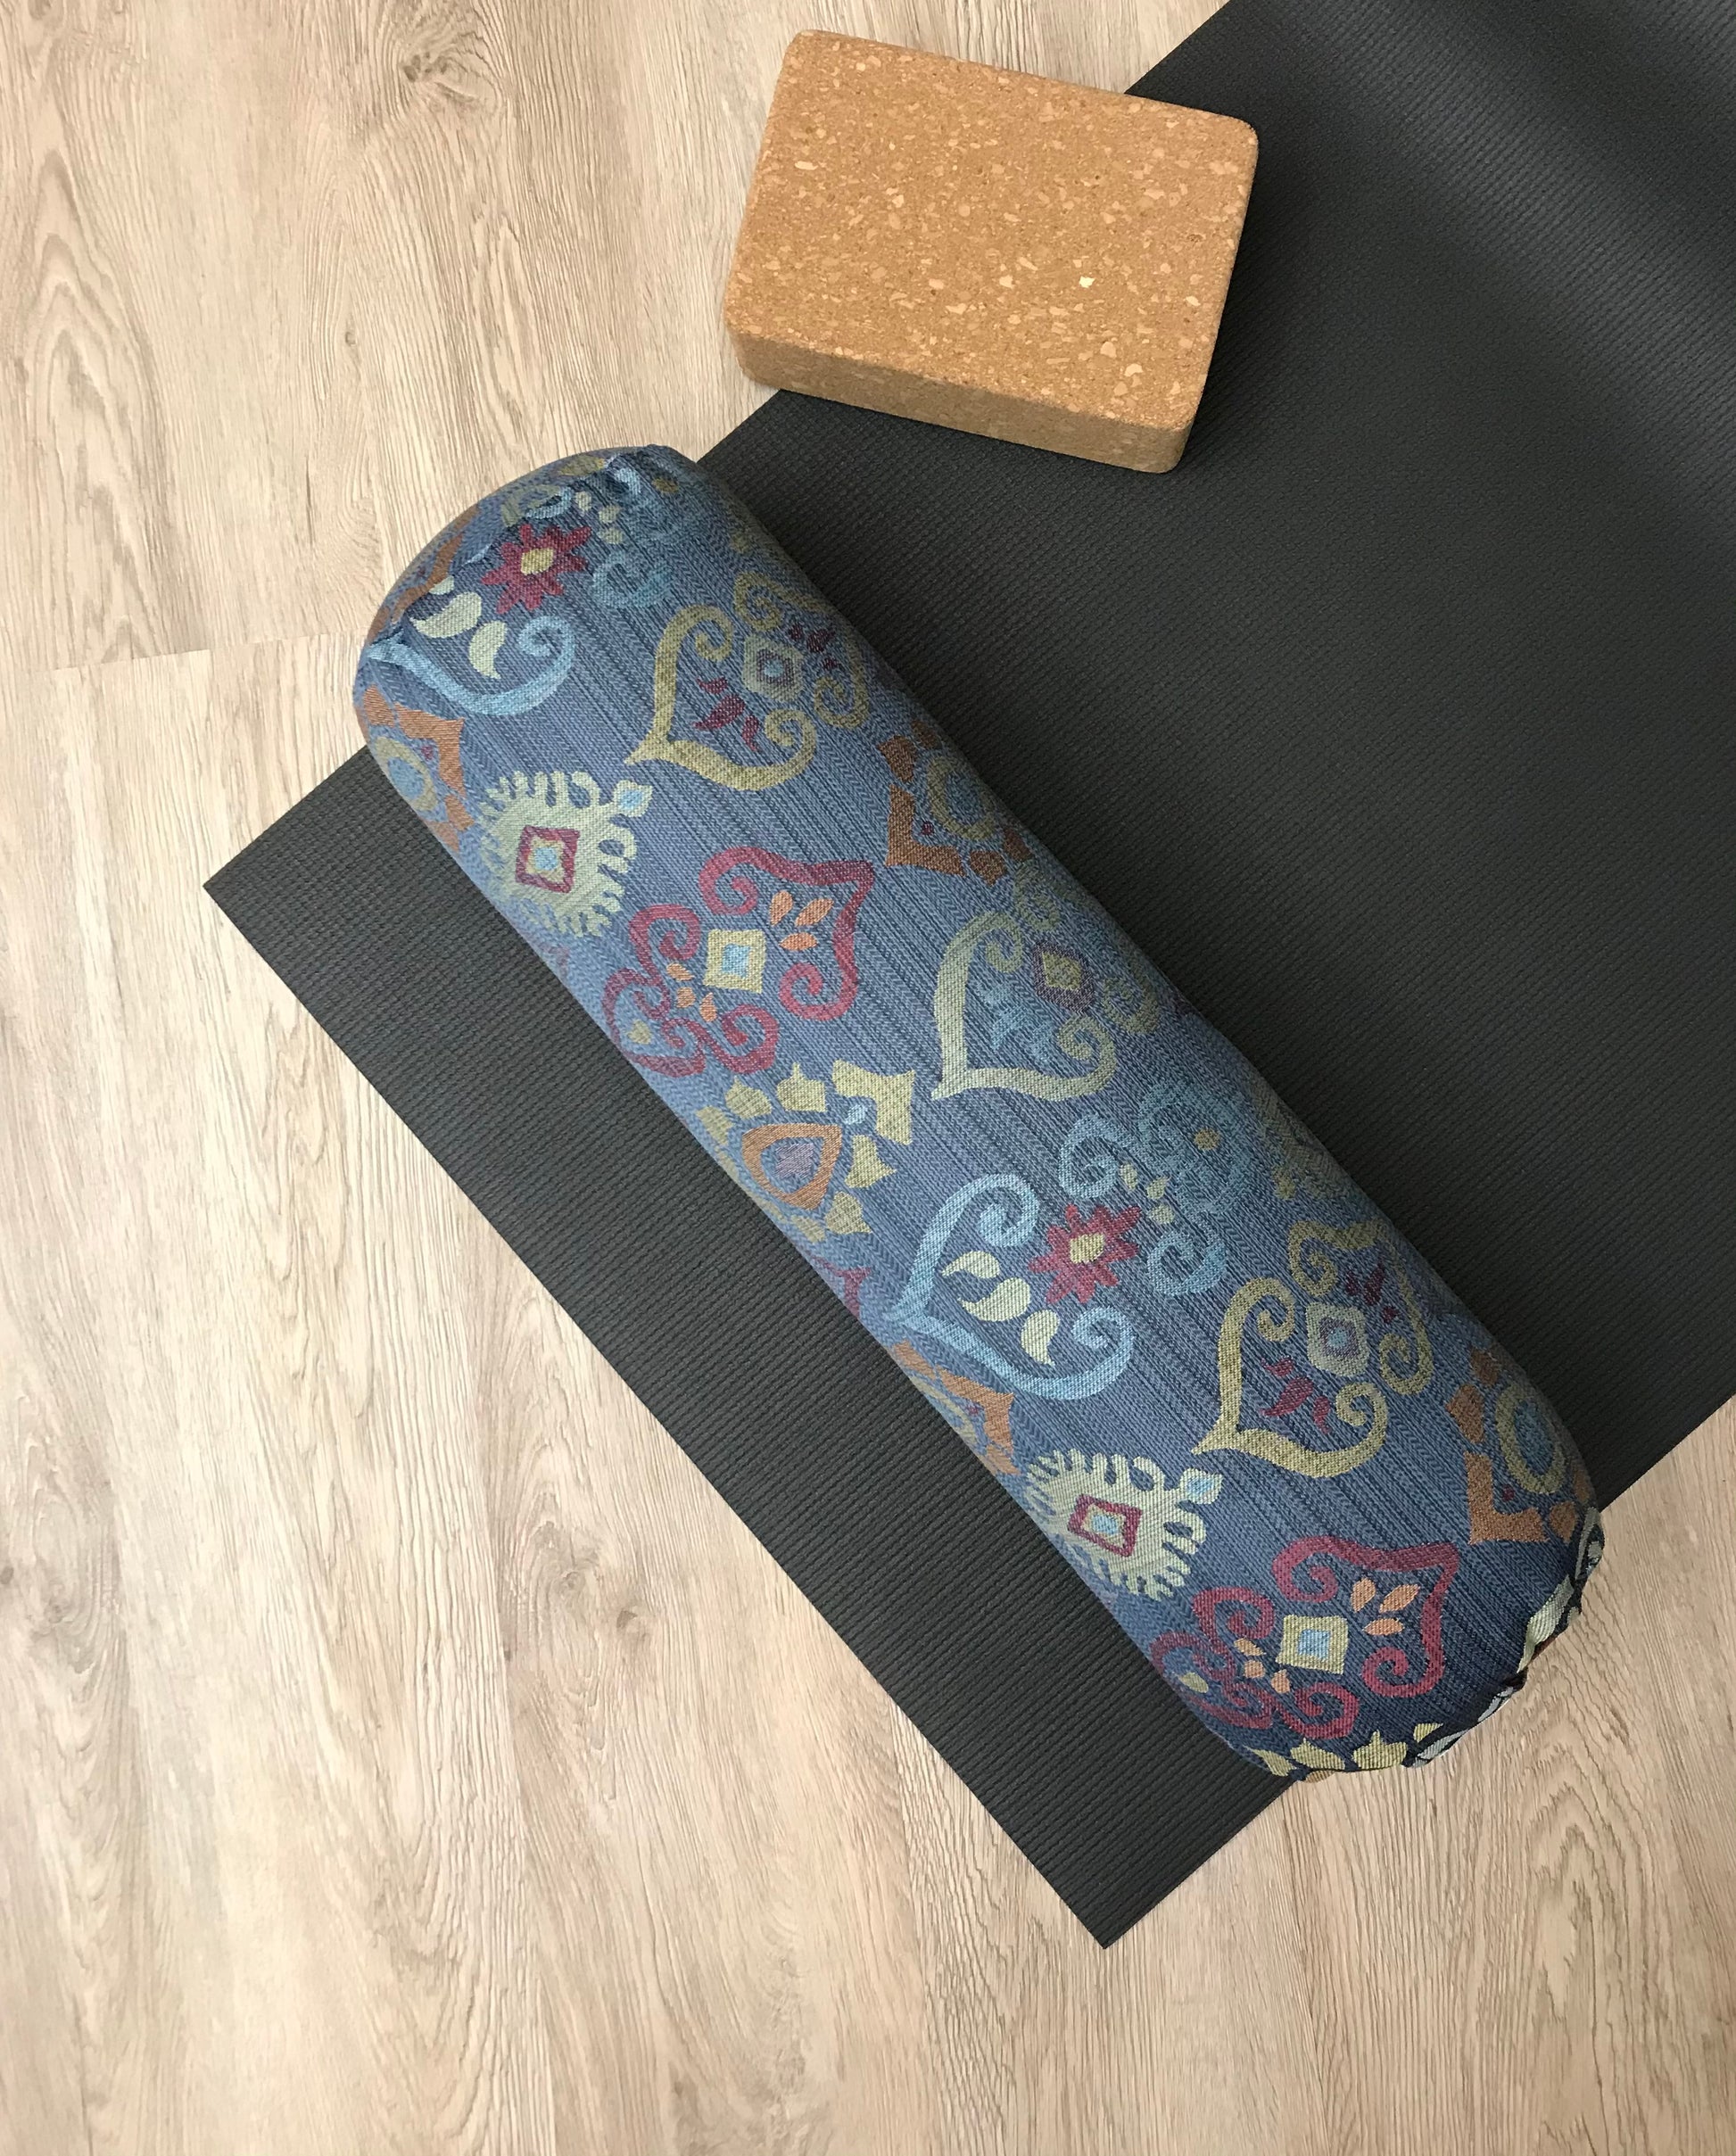 Round yoga bolster in blue and smoky rainbow colour print fabric. Allergy conscious fill with removeable cover. Made in Canada by My Yoga Room Elements